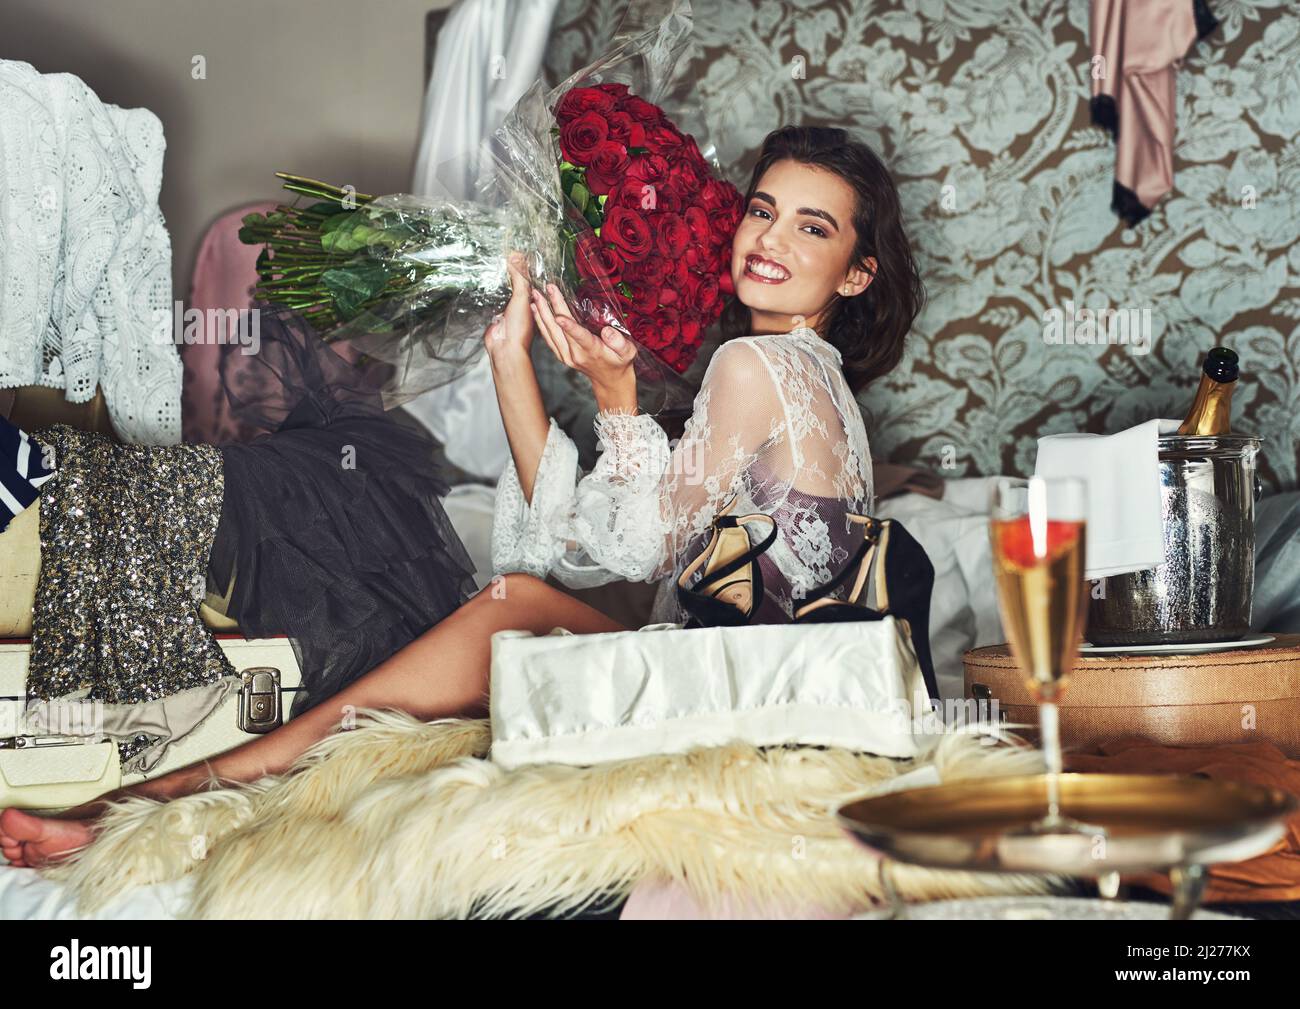 Flowers always puts me in a good mood. Portrait of a beautiful young woman relaxing on her bed and being surrounded by gifts while holding a bouquet Stock Photo